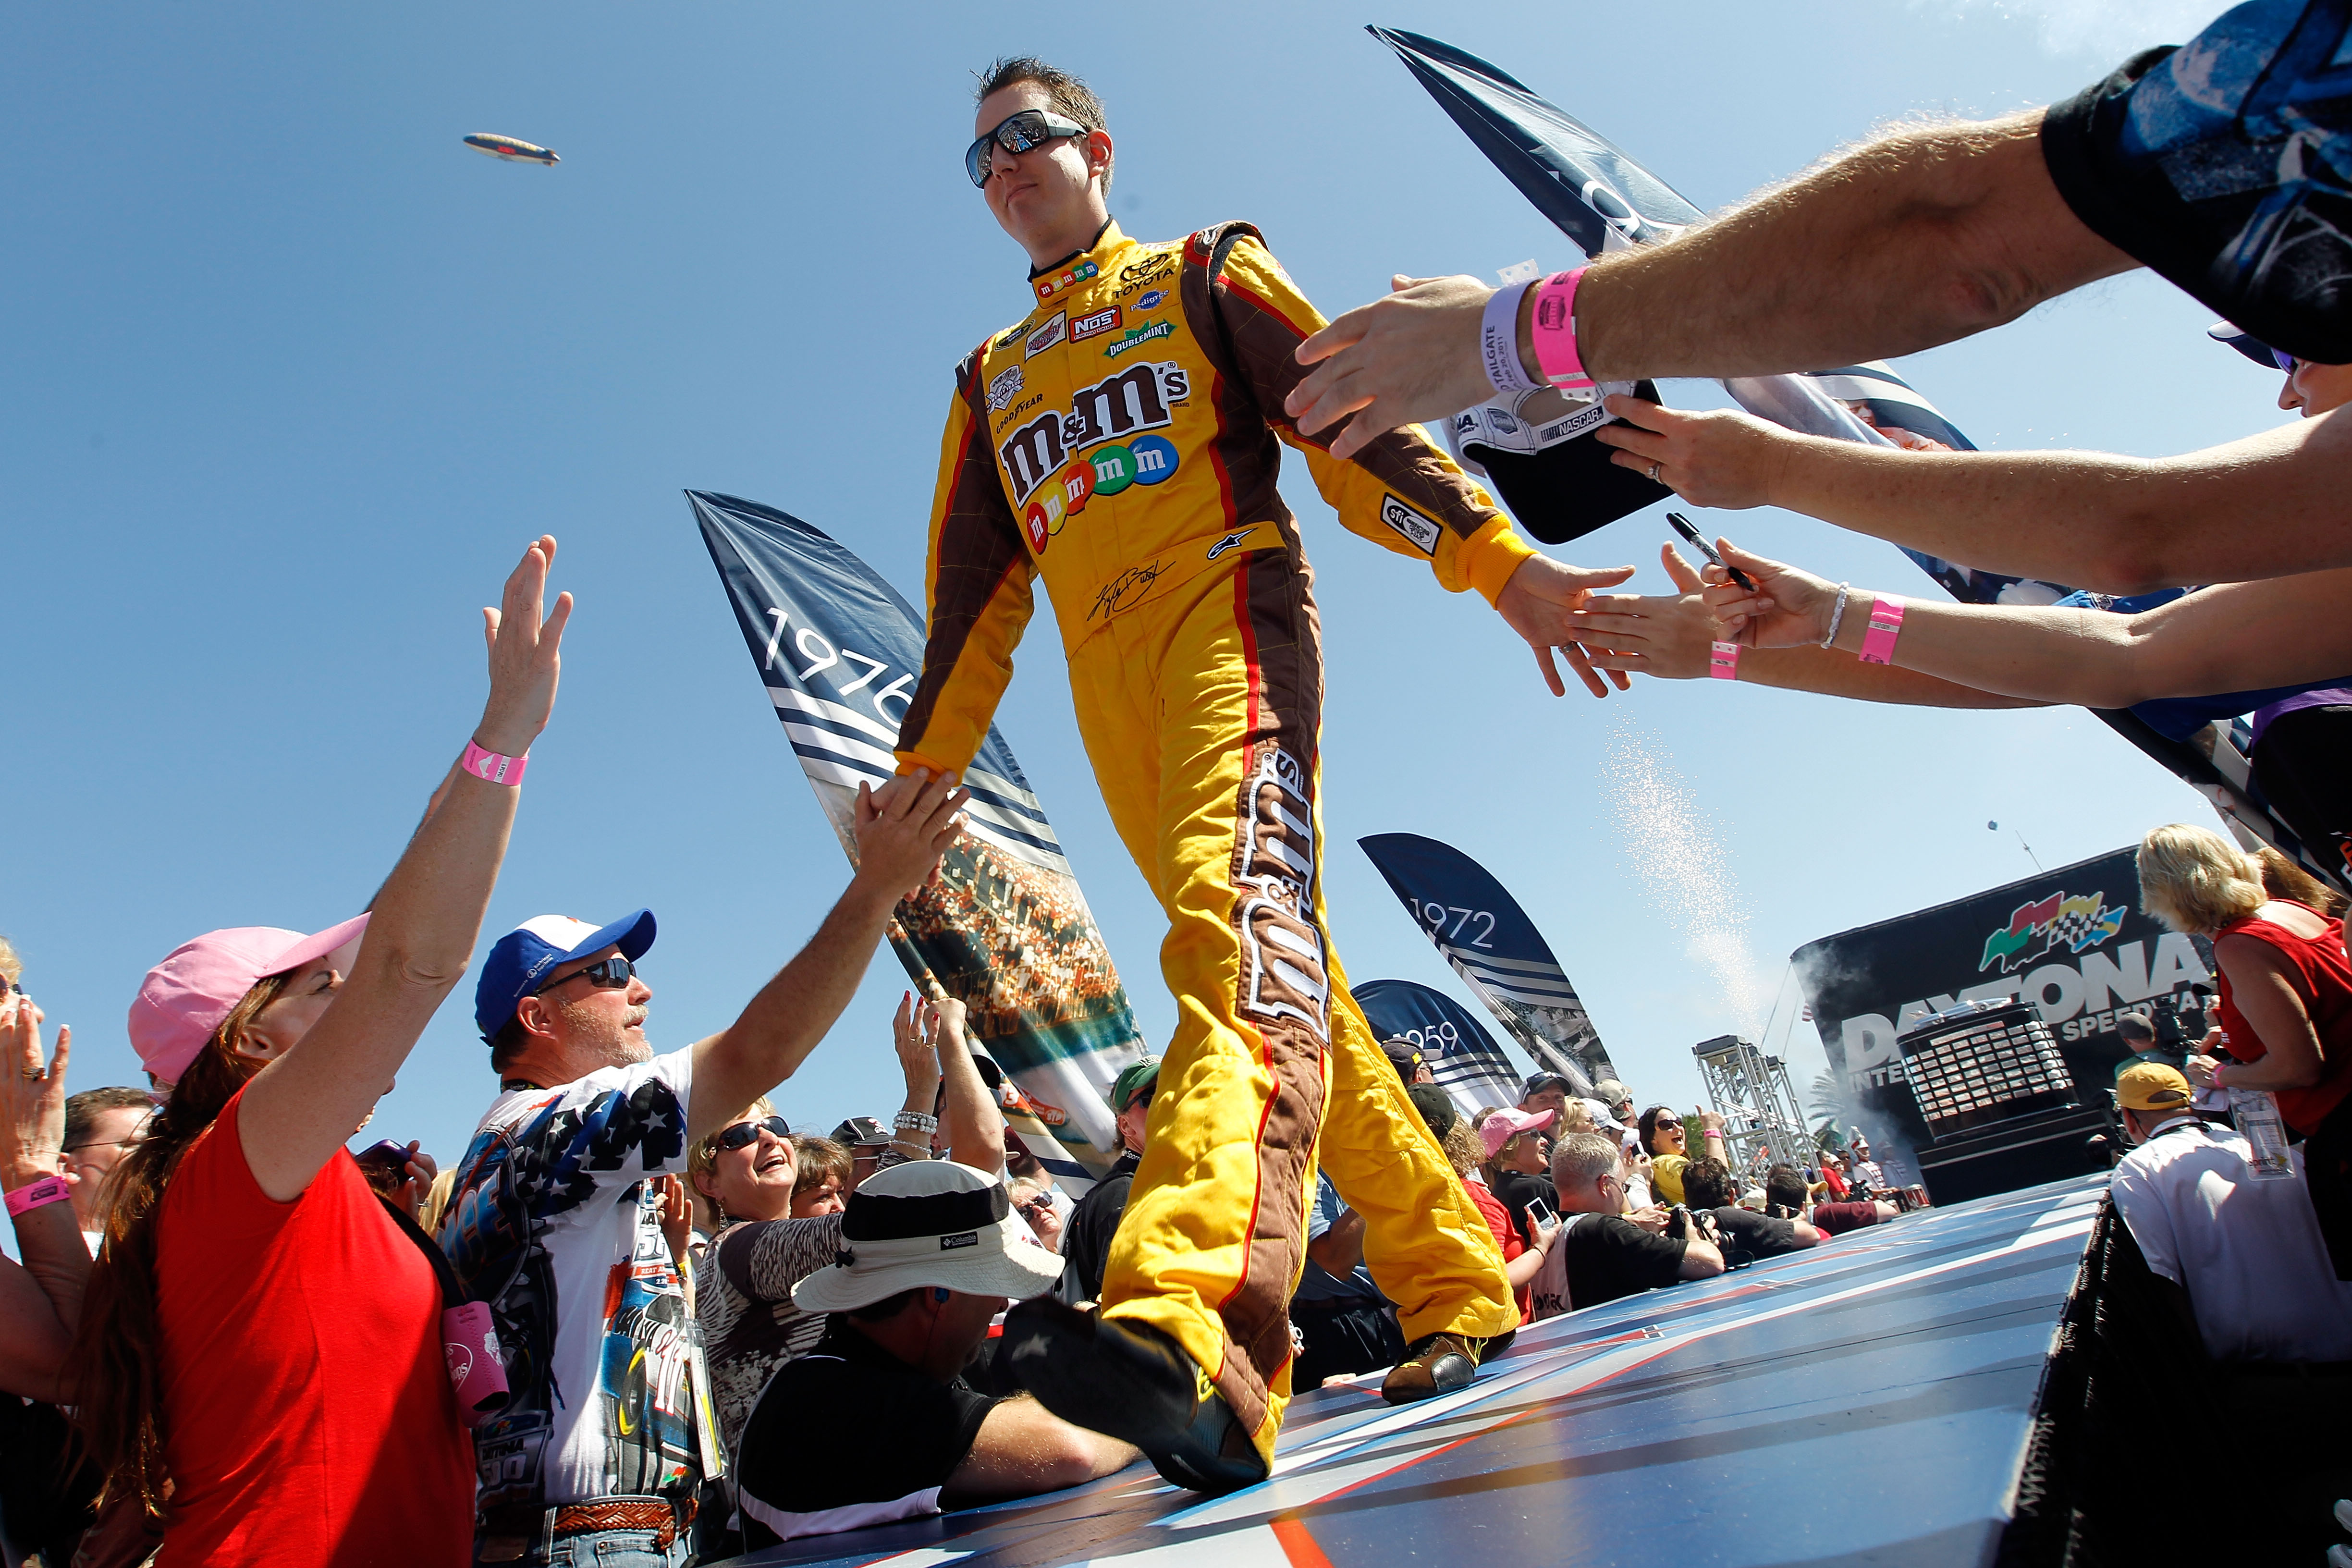 DAYTONA BEACH, FL - FEBRUARY 20:  Kyle Busch, driver of the #18 M&M'sToyota, is introduced during pre-race ceremonies for the NASCAR Sprint Cup Series Daytona 500 at Daytona International Speedway on February 20, 2011 in Daytona Beach, Florida.  (Photo by